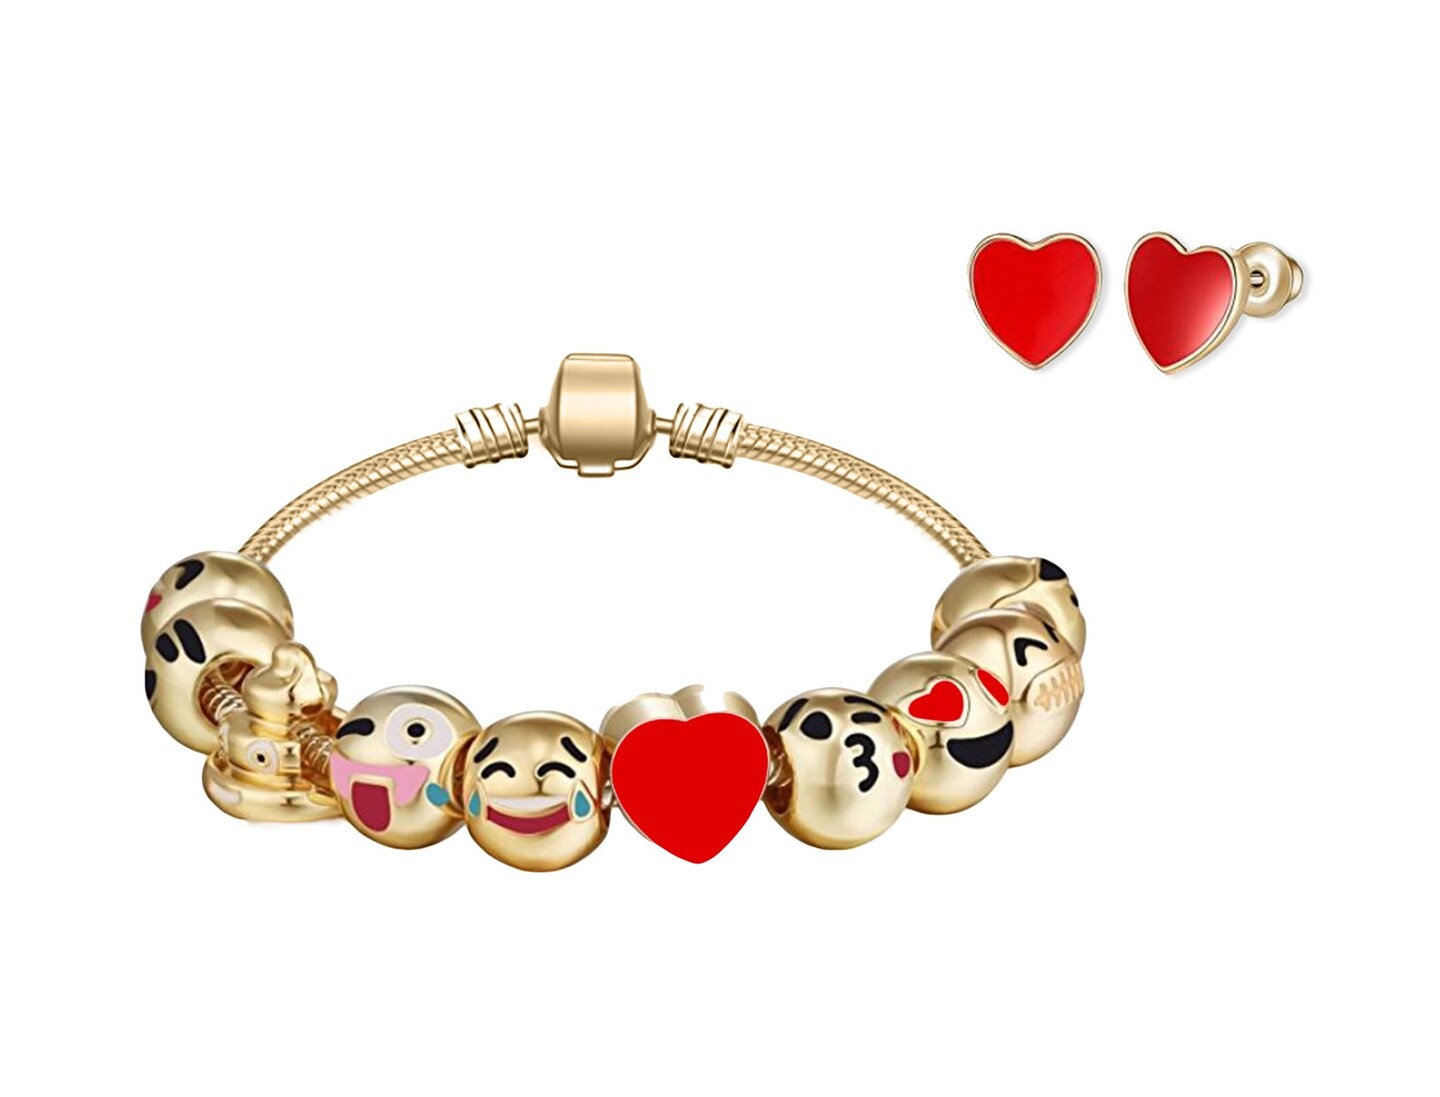 Big Mo&#x27;s Toys Girls Gift - Emoji Charm Bracelet and Earrings Jewelry Set for Girls and Women